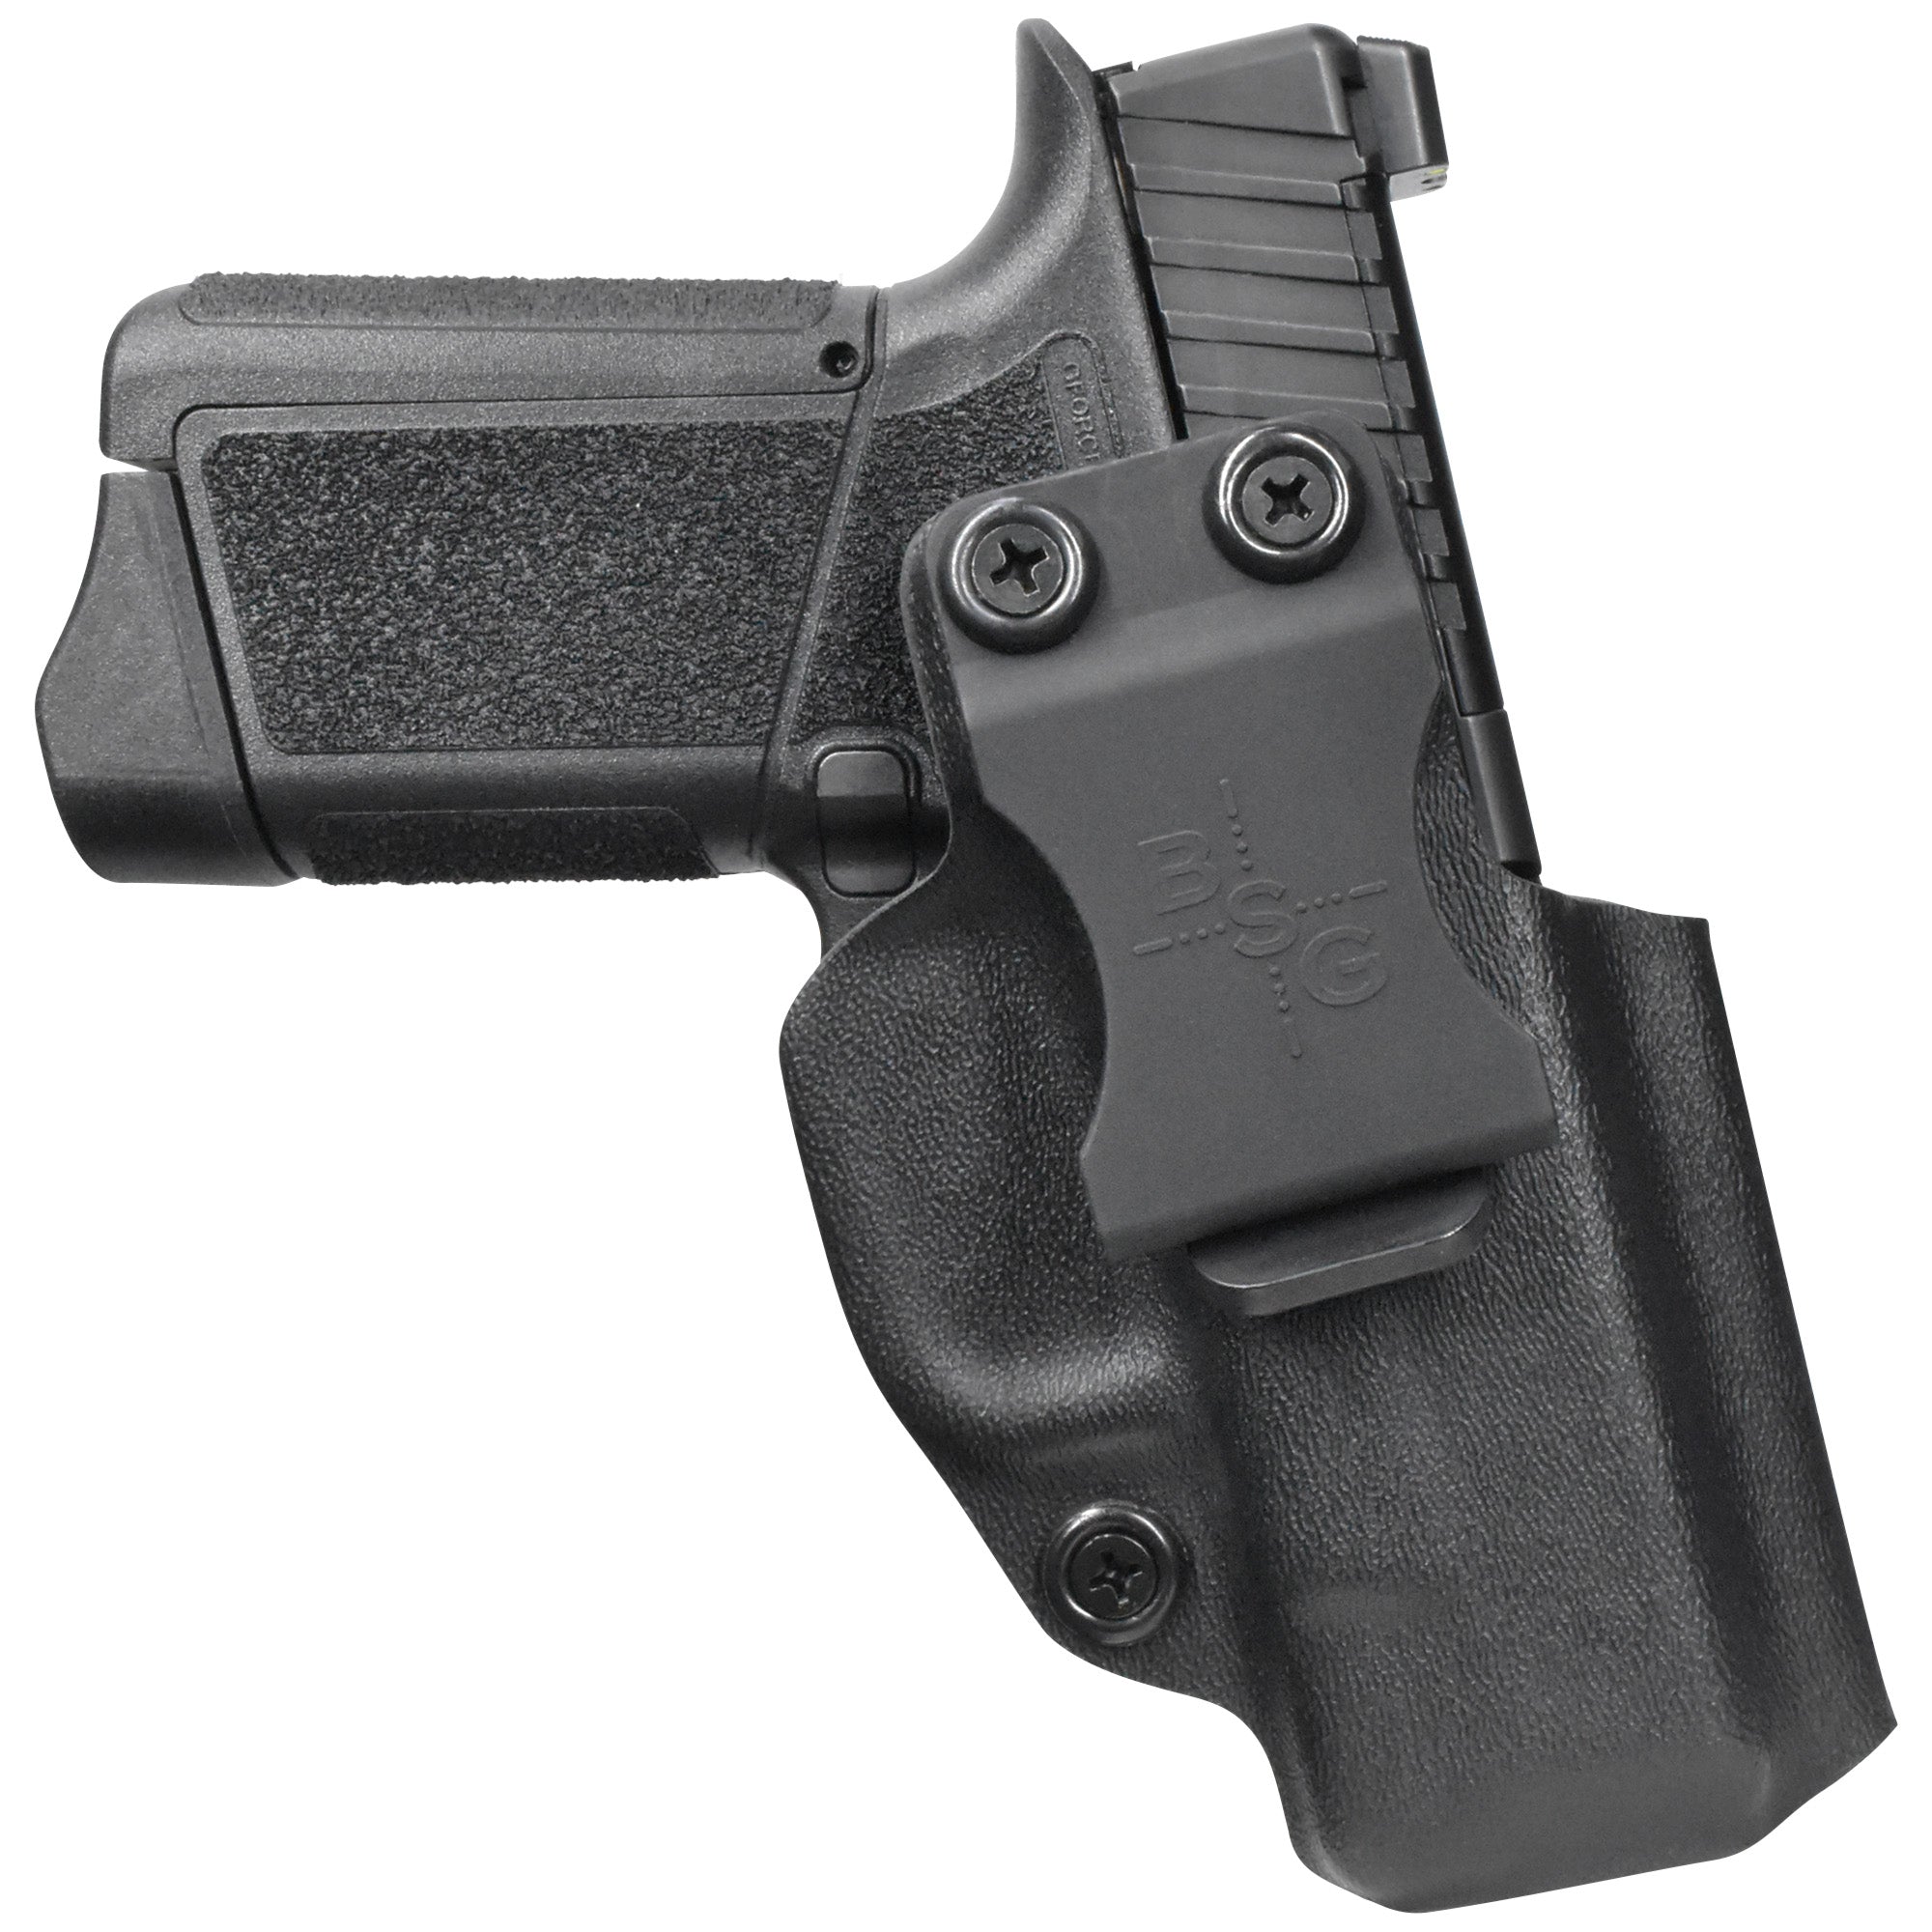 GForce Arms GF9 Rapture IWB Sweat Guard Holster in Black - Front